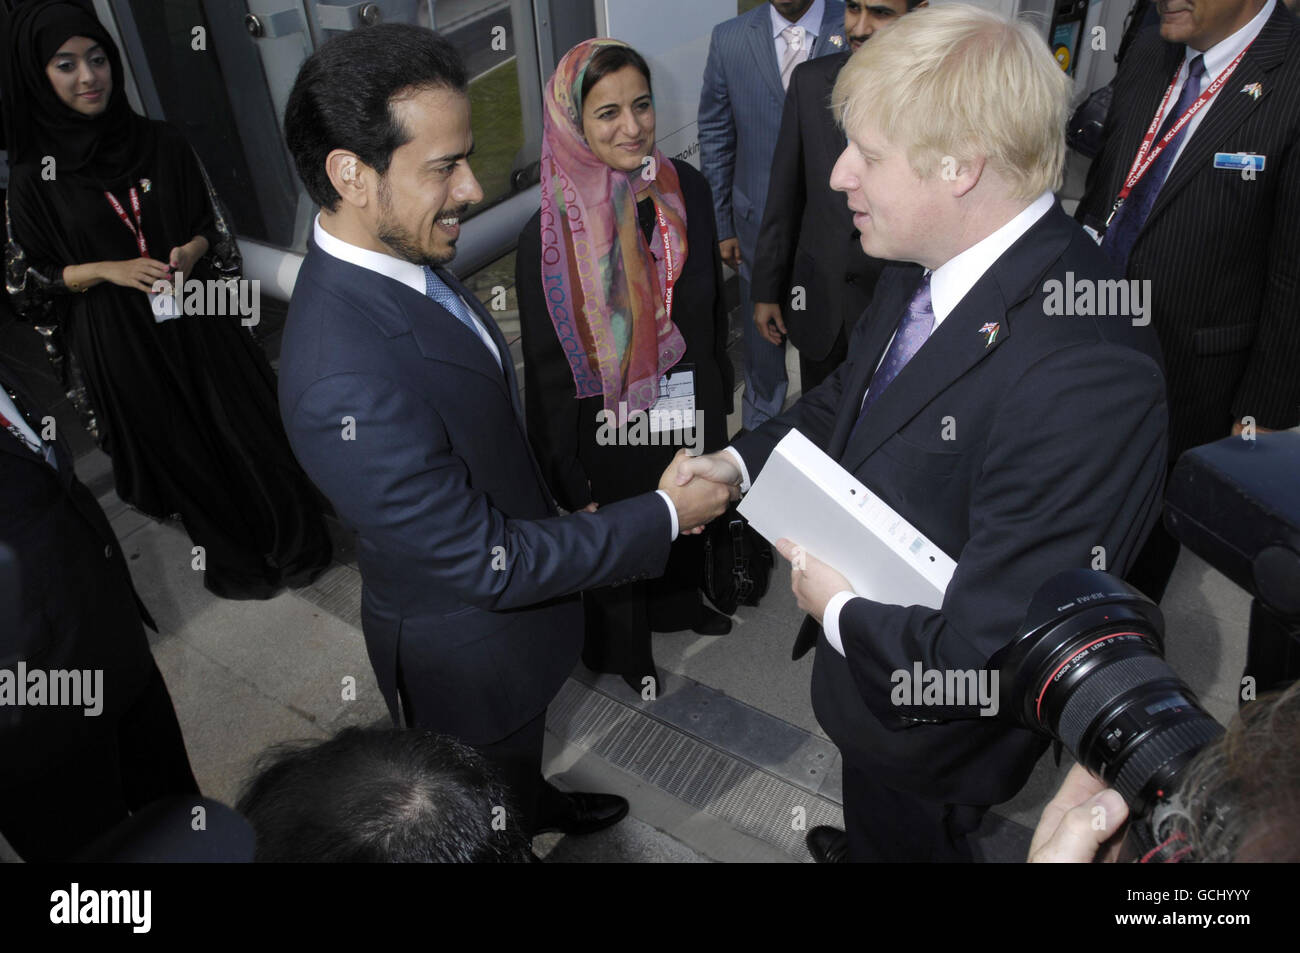 Mayor of London, Boris Johnson, (right) meets the delegation led by the Abu Dhabi National Exhibitions Company (ADNEC) chairman Sheikh Sultan bin Tahnoon Al Nahyan at the launch of the new International Convention Centre (ICC) at ExCeL London. Stock Photo